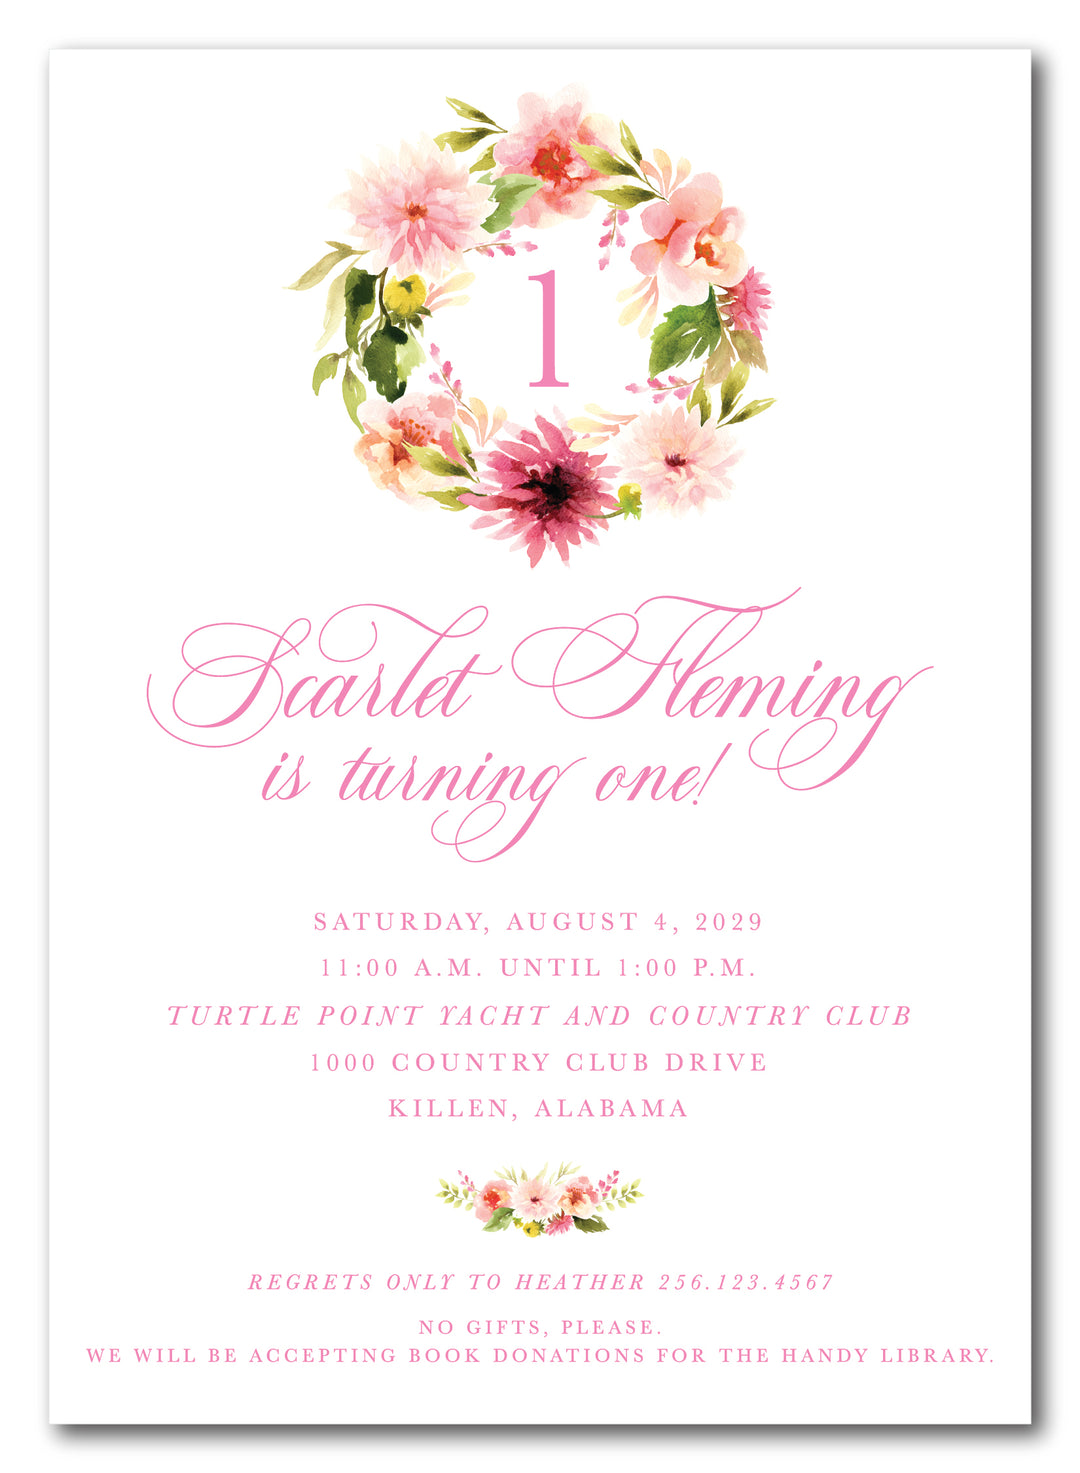 The Floral Wreath Birthday Party Invitation